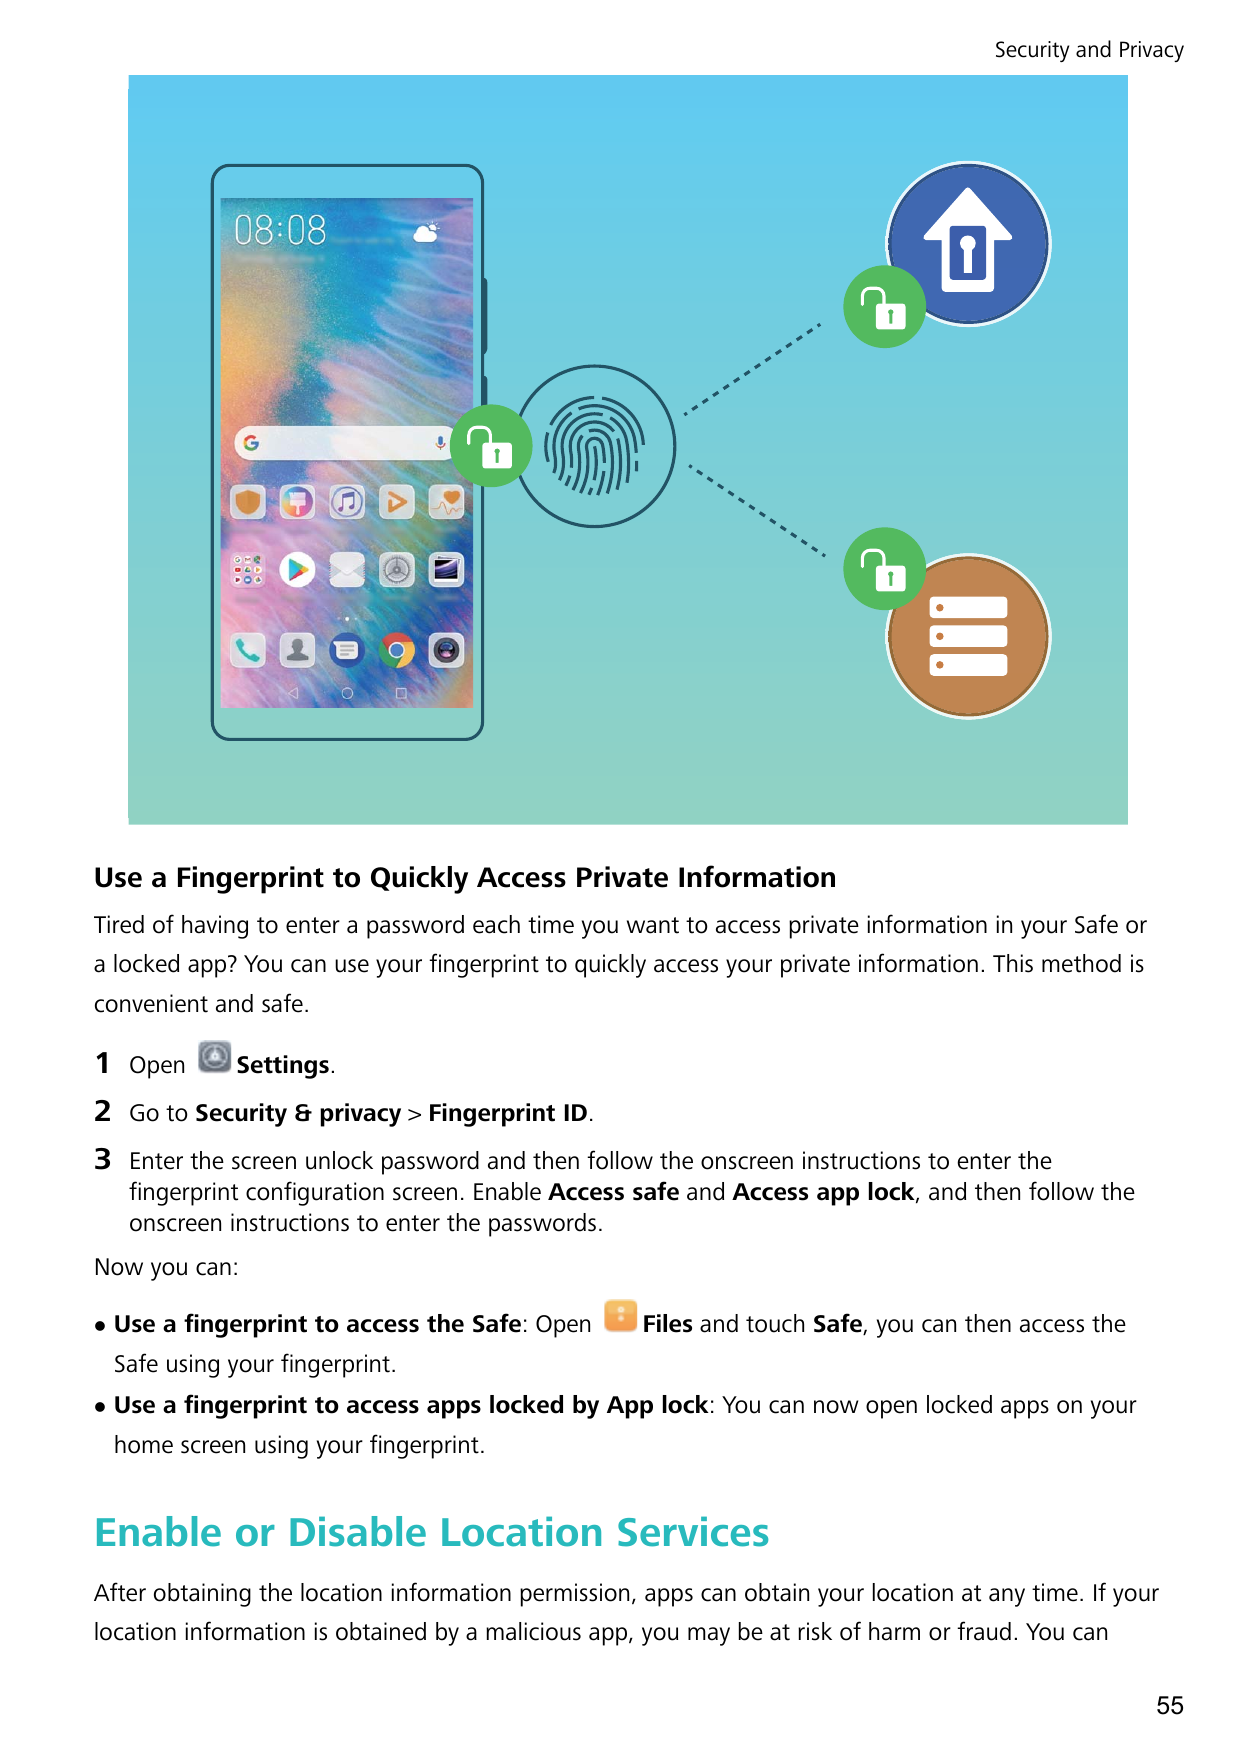 Security and PrivacyUse a Fingerprint to Quickly Access Private InformationTired of having to enter a password each time you wan